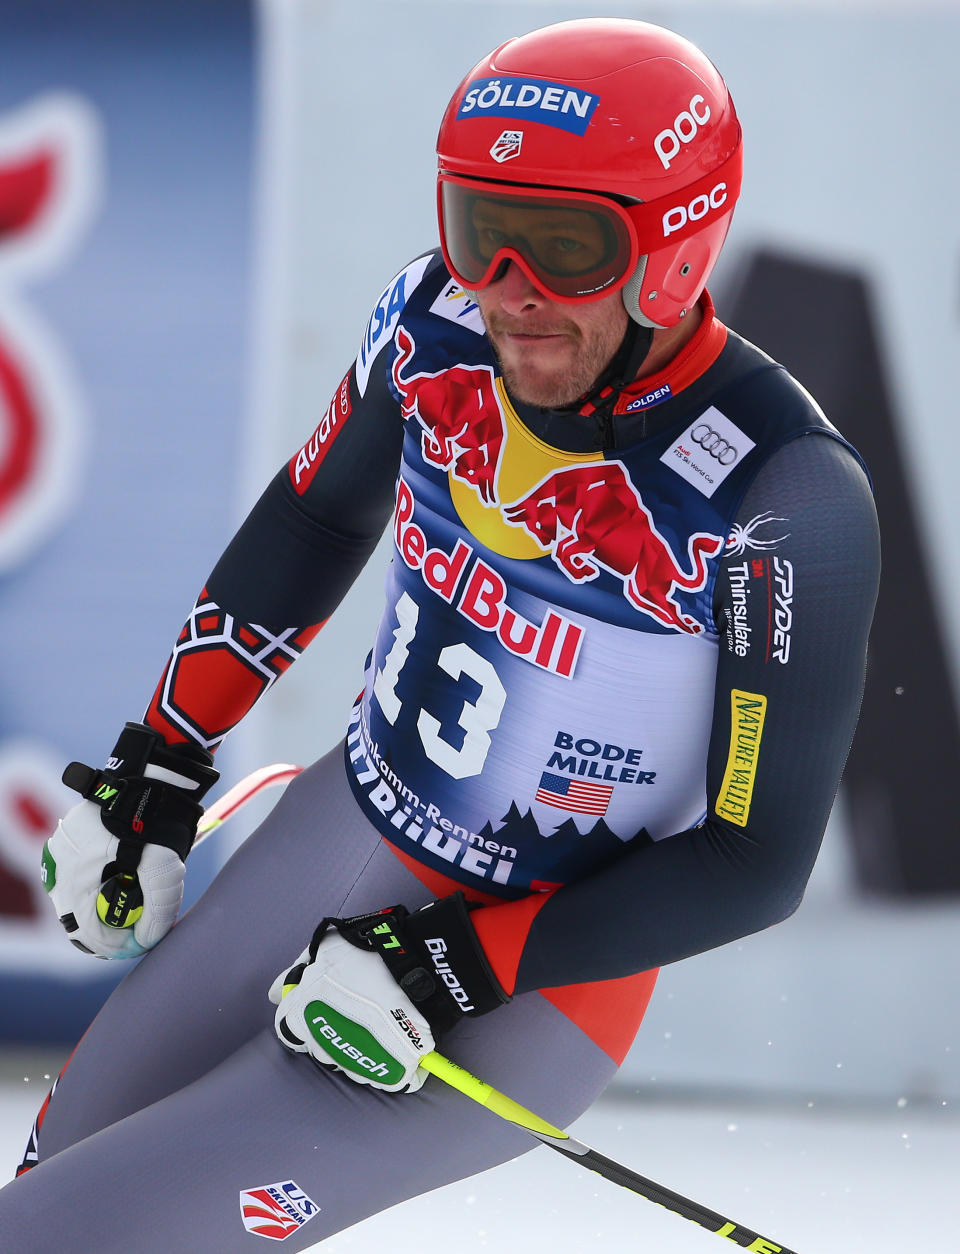 Bode Miller of United States gets to the finish area after completing an alpine ski men's World Cup downhill training in Kitzbuehel, Austria, Thursday, Jan. 23, 2014. (AP Photo/Giovanni Auletta)